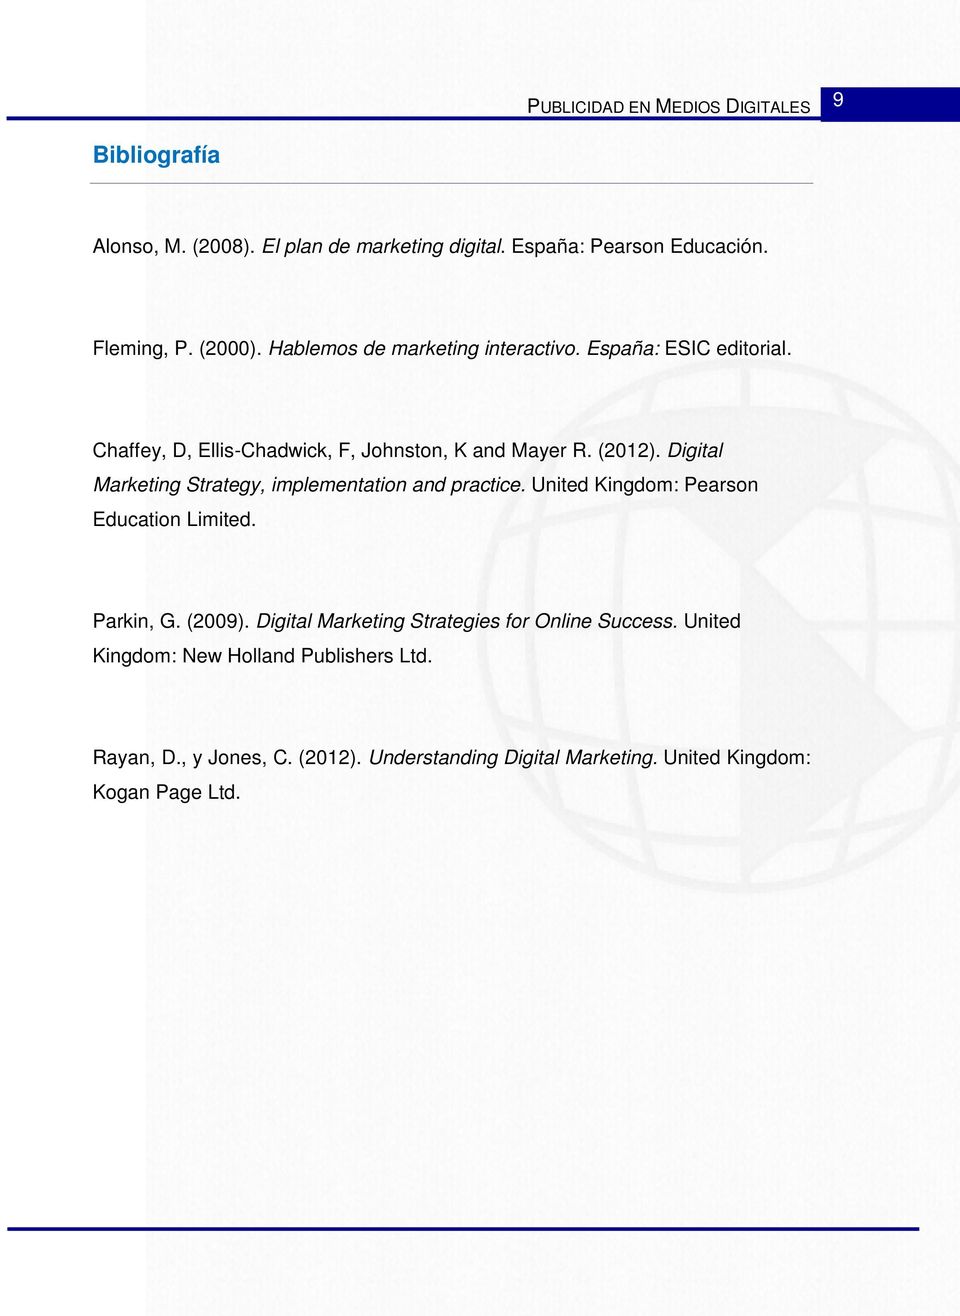 Digital Marketing Strategy, implementation and practice. United Kingdom: Pearson Education Limited. Parkin, G. (2009).